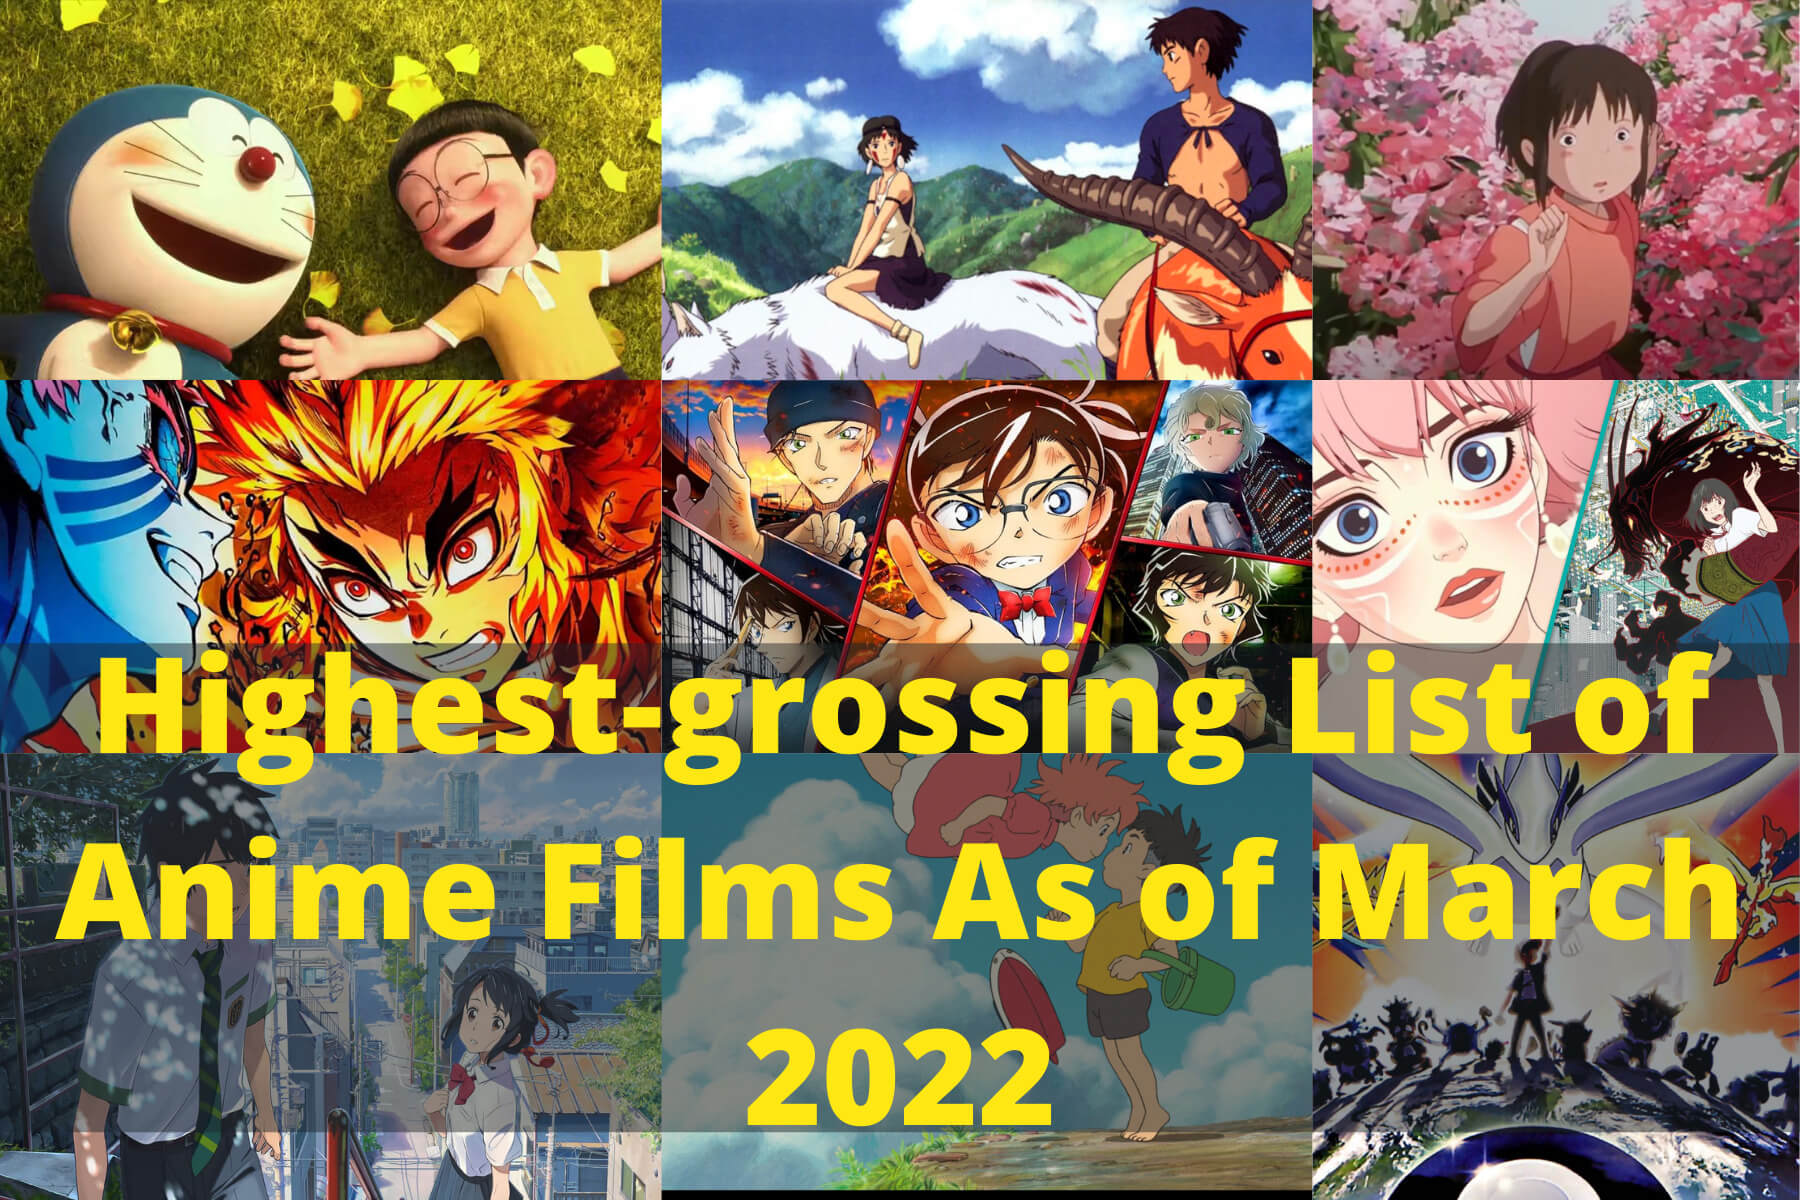 Highest-grossing List of Anime Films As of March 2022 » Amazfeed